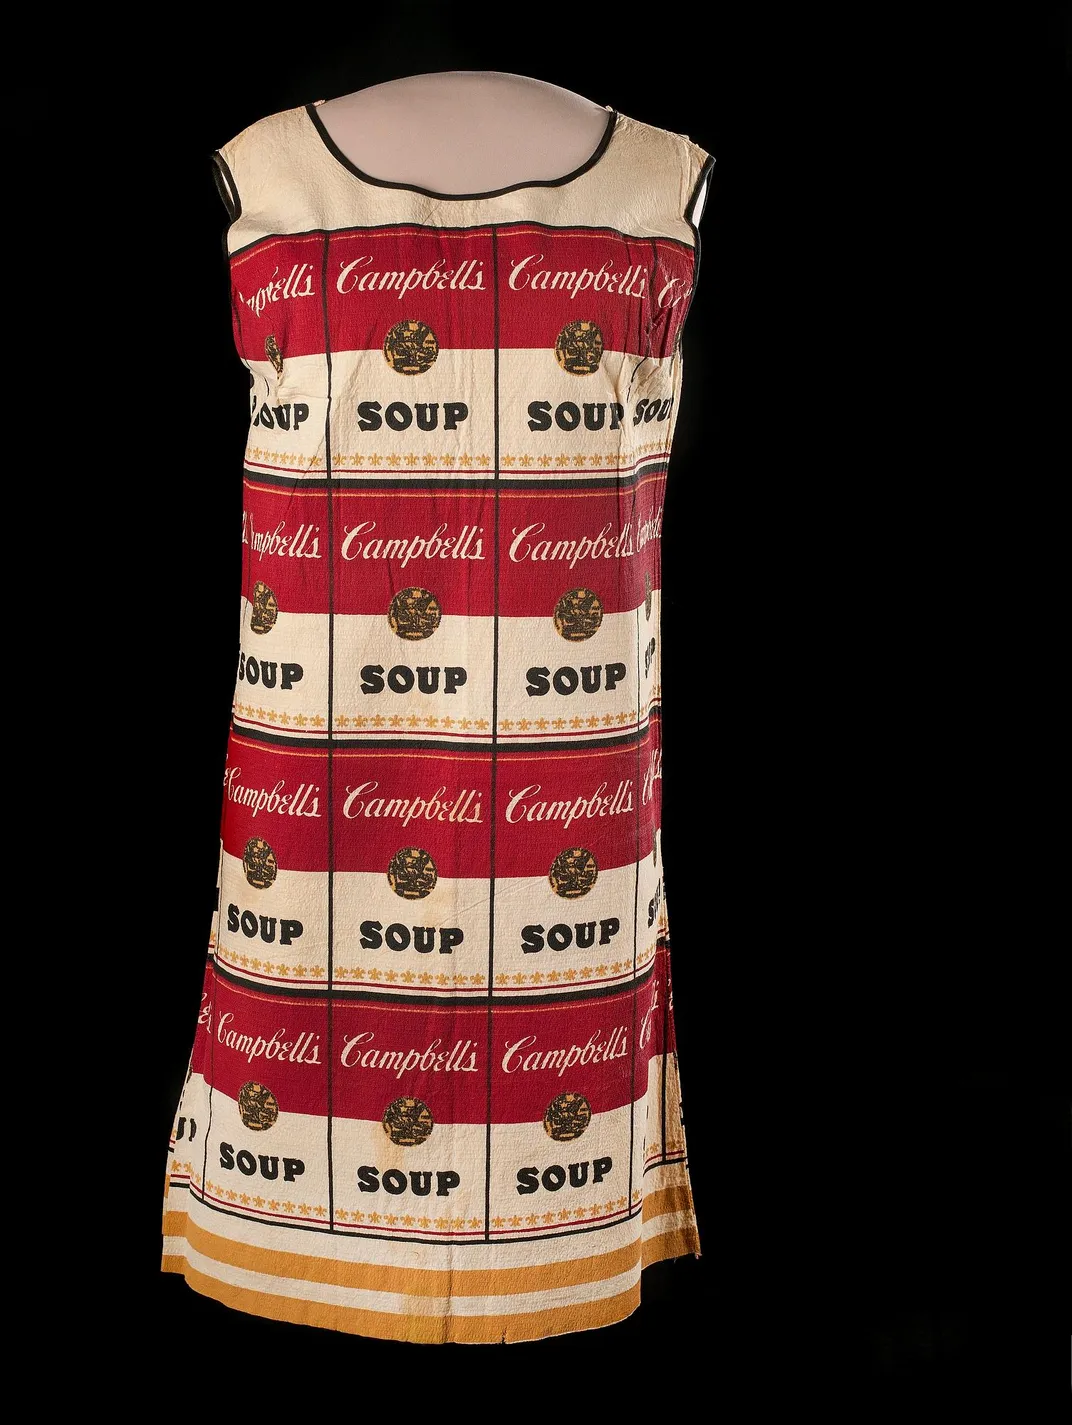 Paper Dress, Campbell's Soup Company